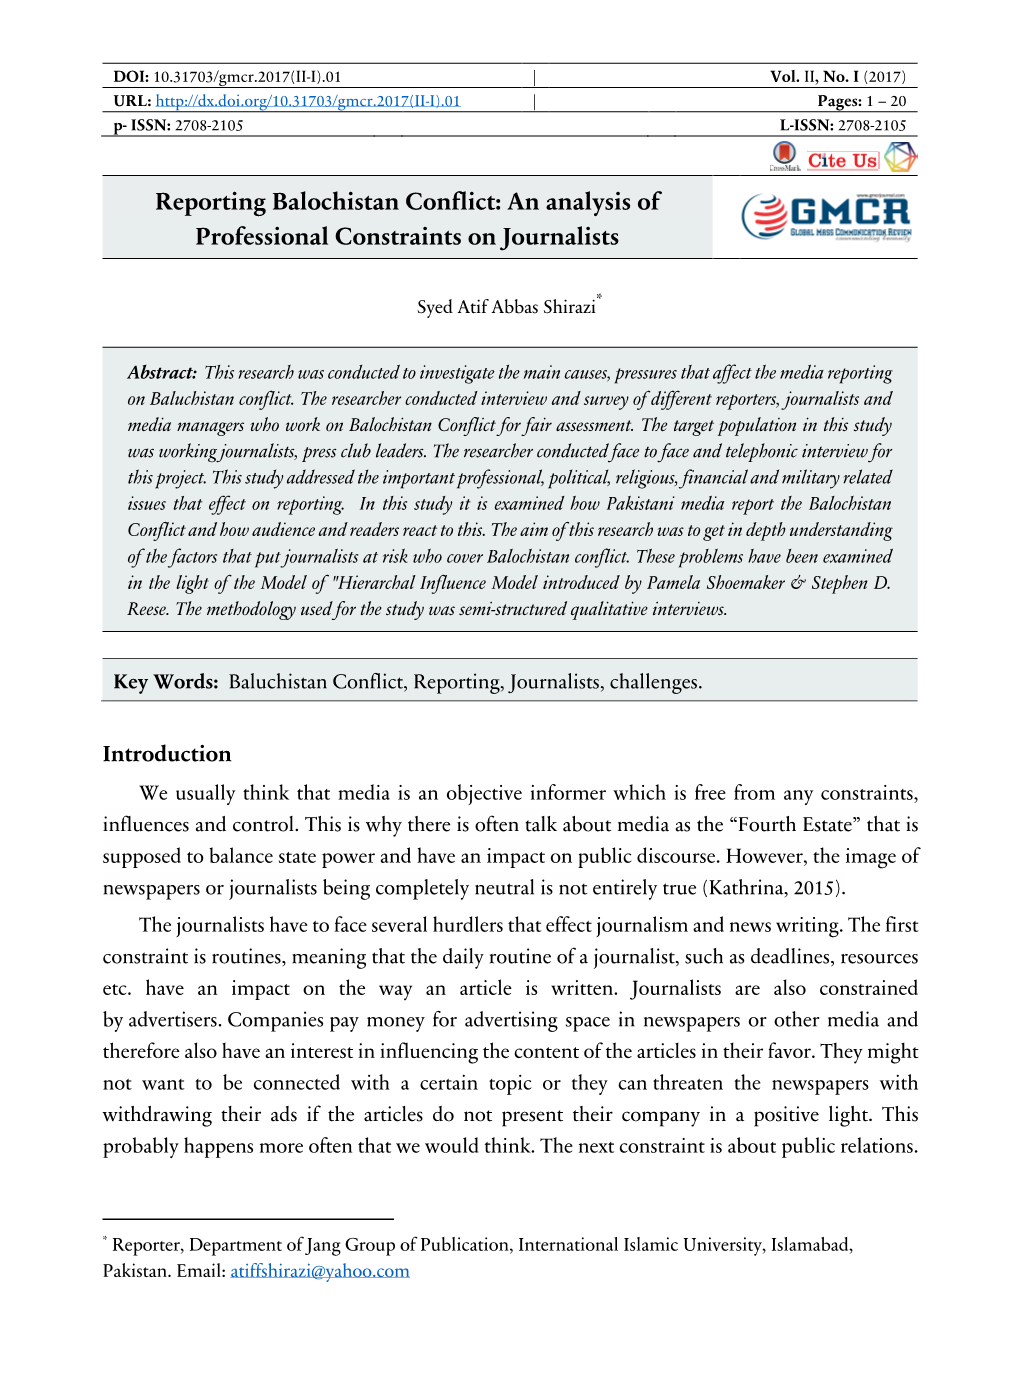 Reporting Balochistan Conflict: an Analysis of Professional Constraints on Journalists